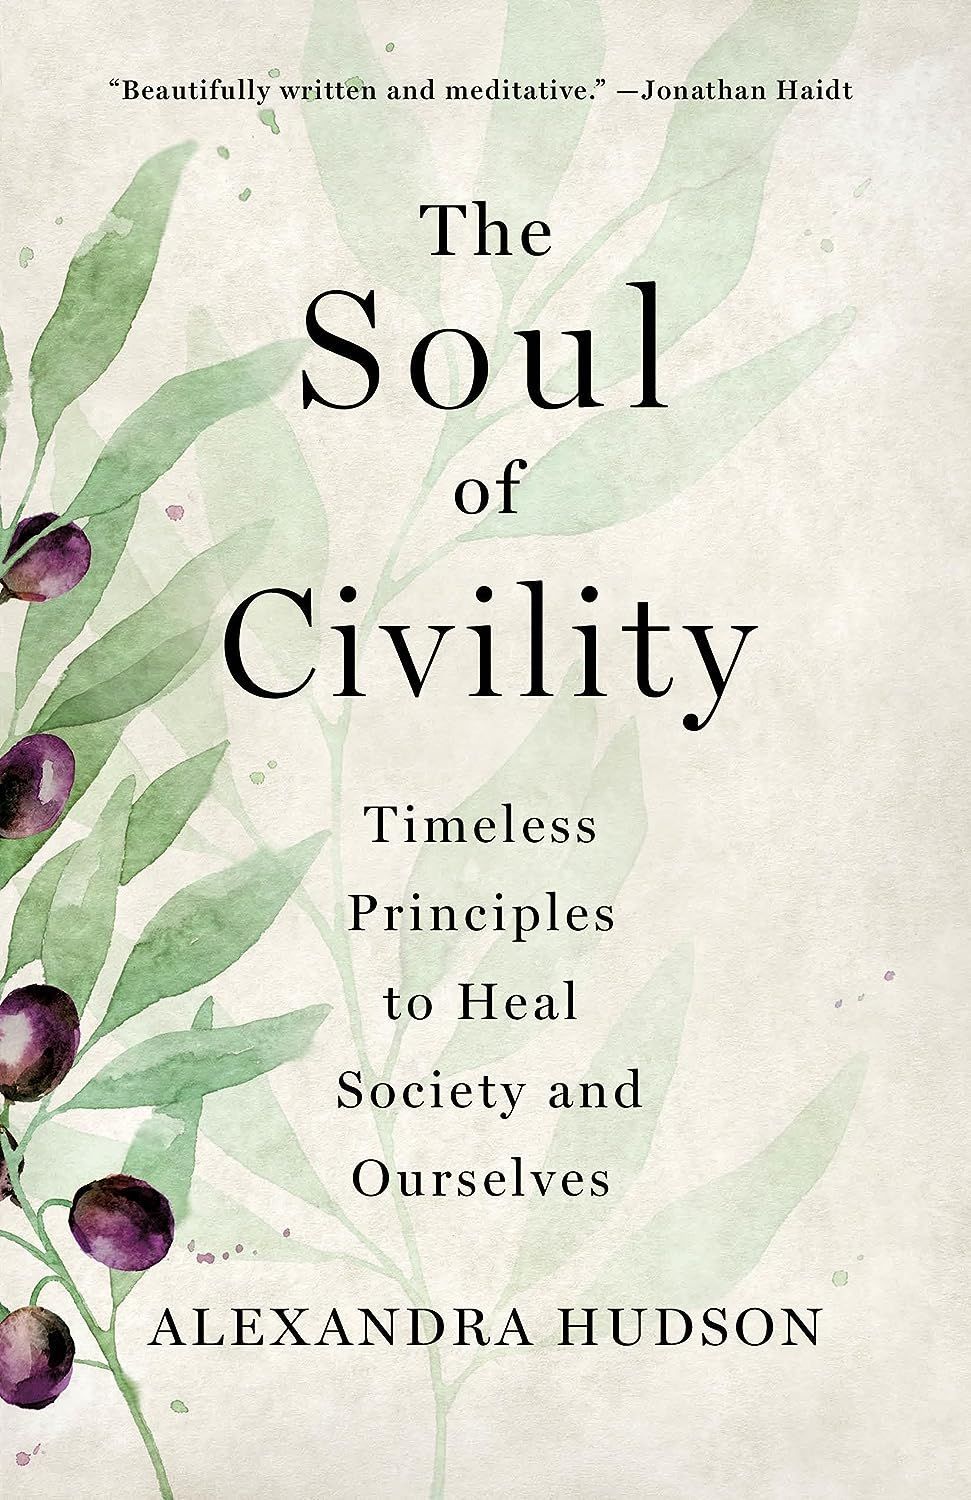 Arguing Alone: On Alexandra Hudson’s “The Soul of Civility”